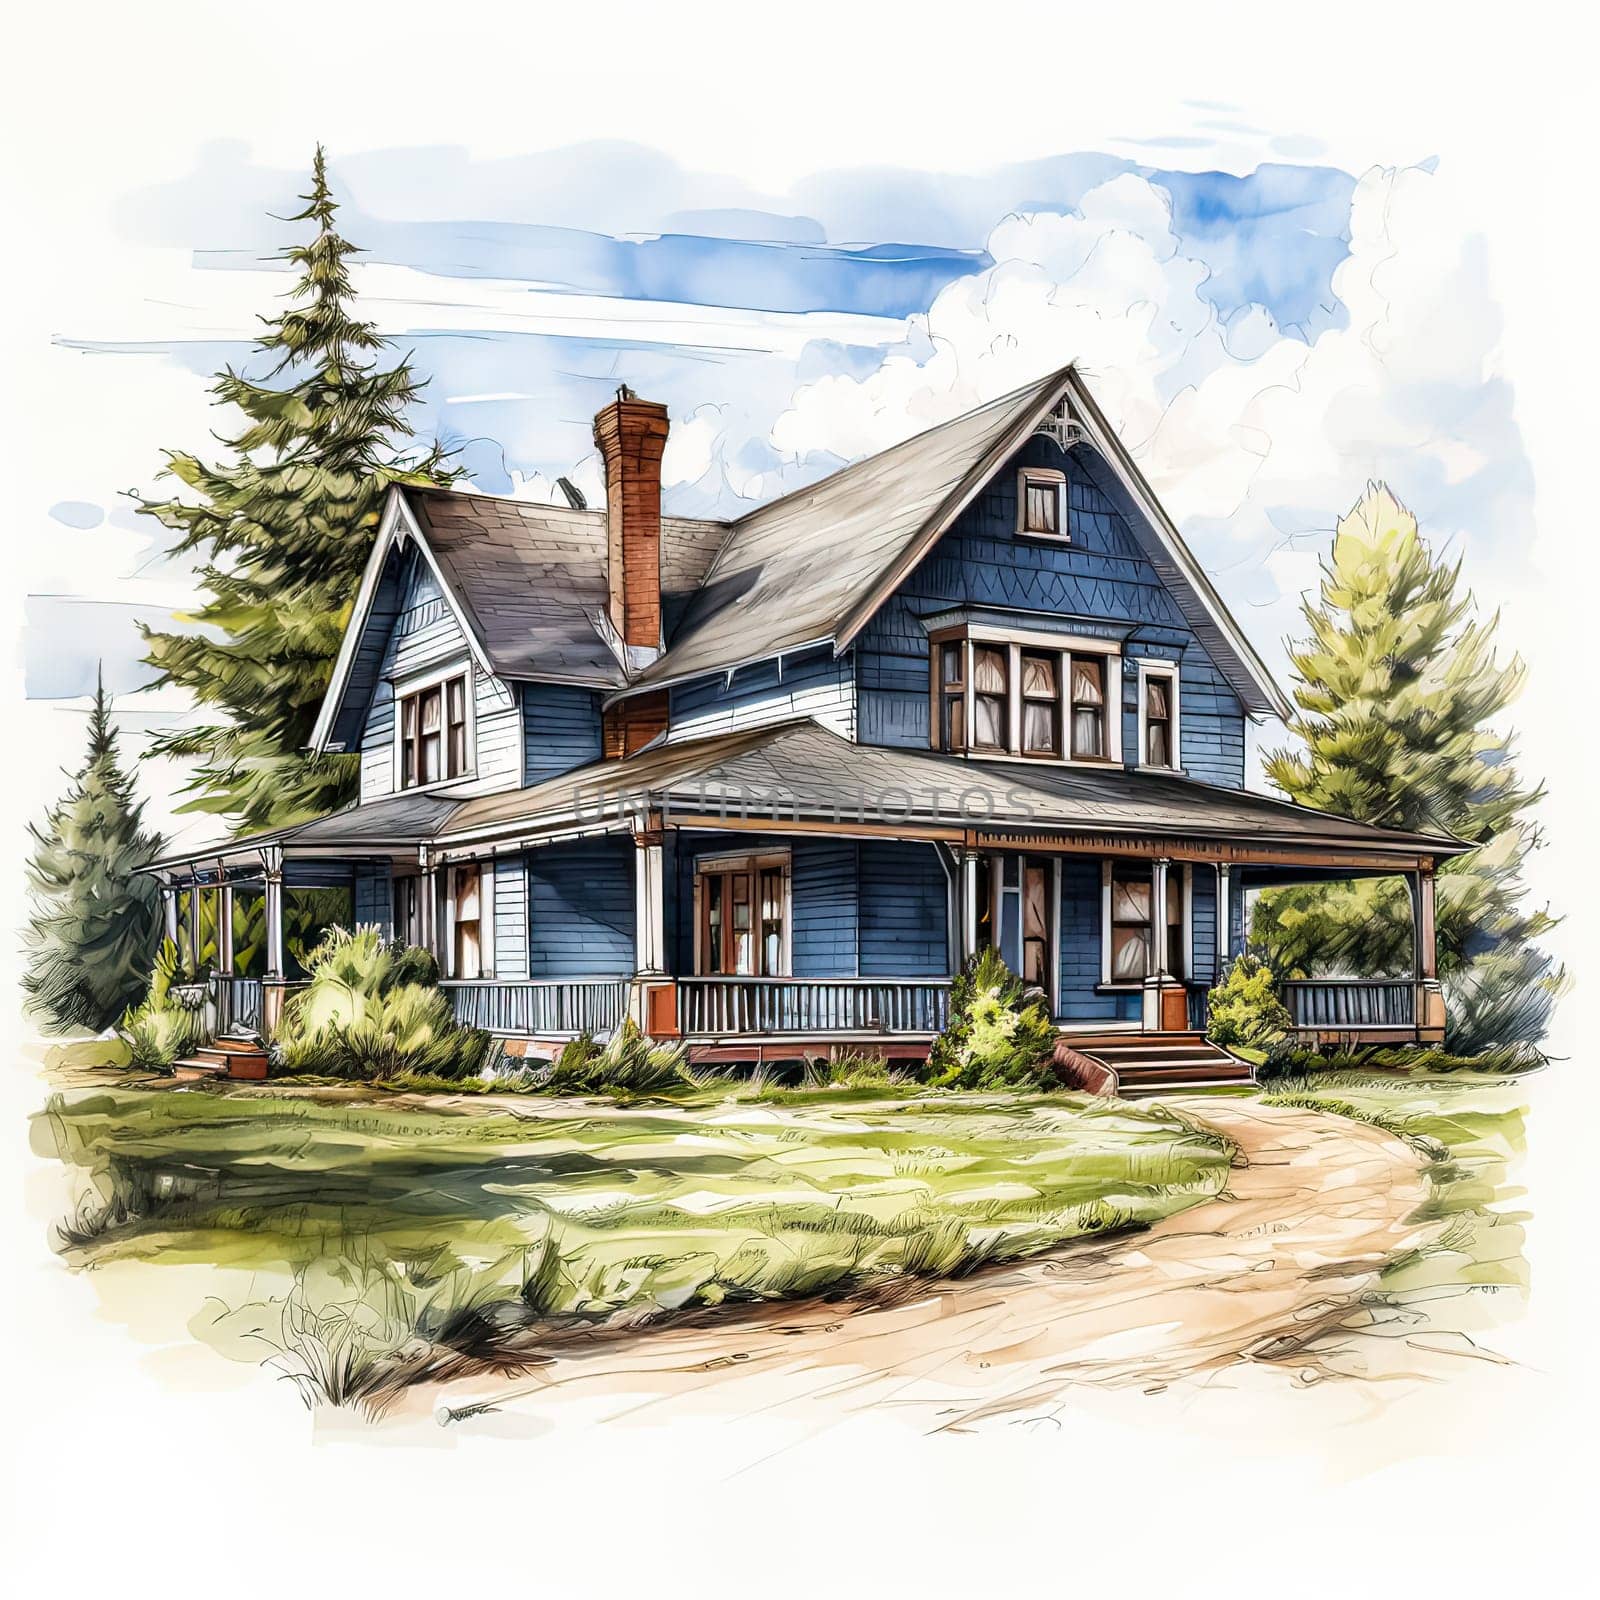 A charming house in a summer forest, surrounded by lush greenery a serene illustration of nature's vibrant embrace